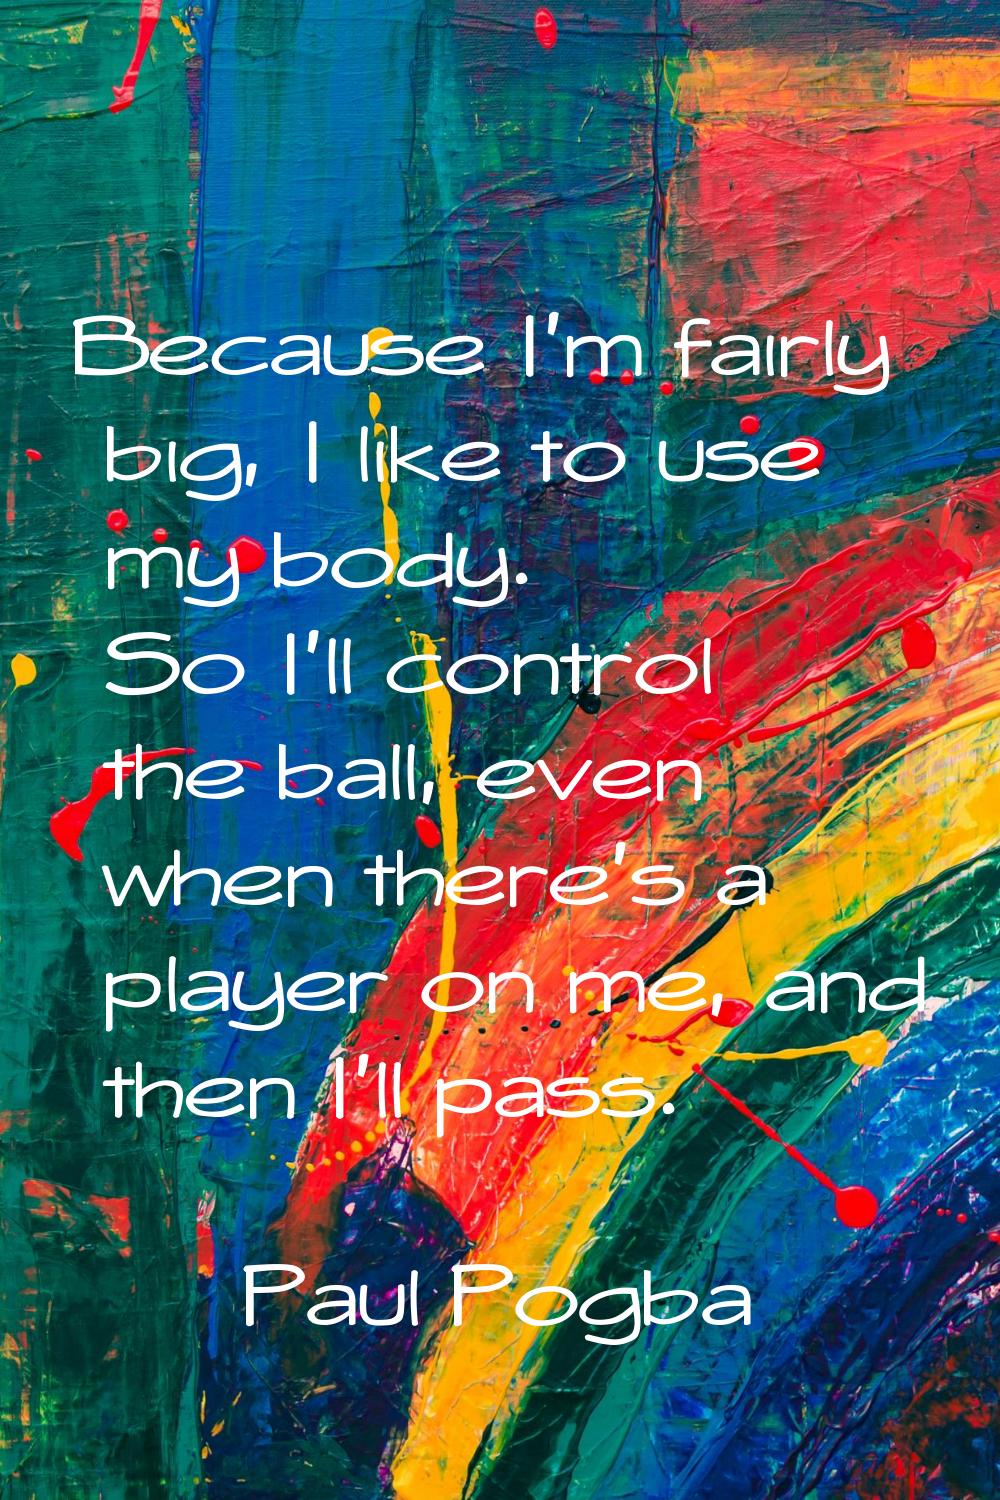 Because I'm fairly big, I like to use my body. So I'll control the ball, even when there's a player